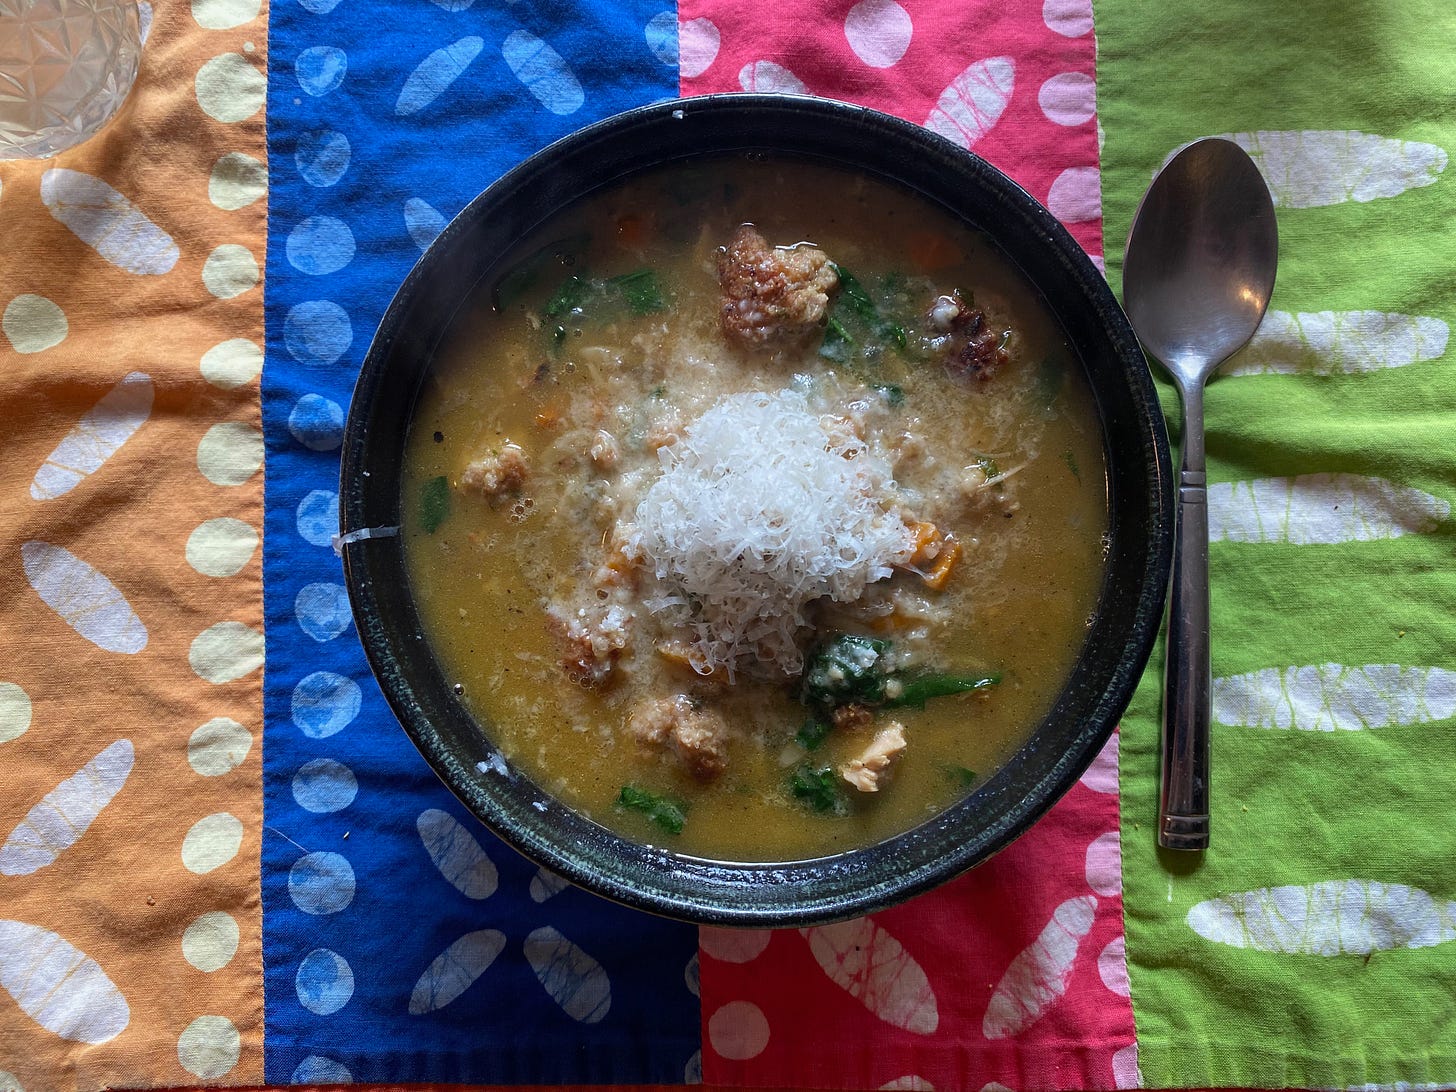 A ceramic bowl of Italian wedding soup, topped with a pile of grated Pamesan, on a colorful placemat.